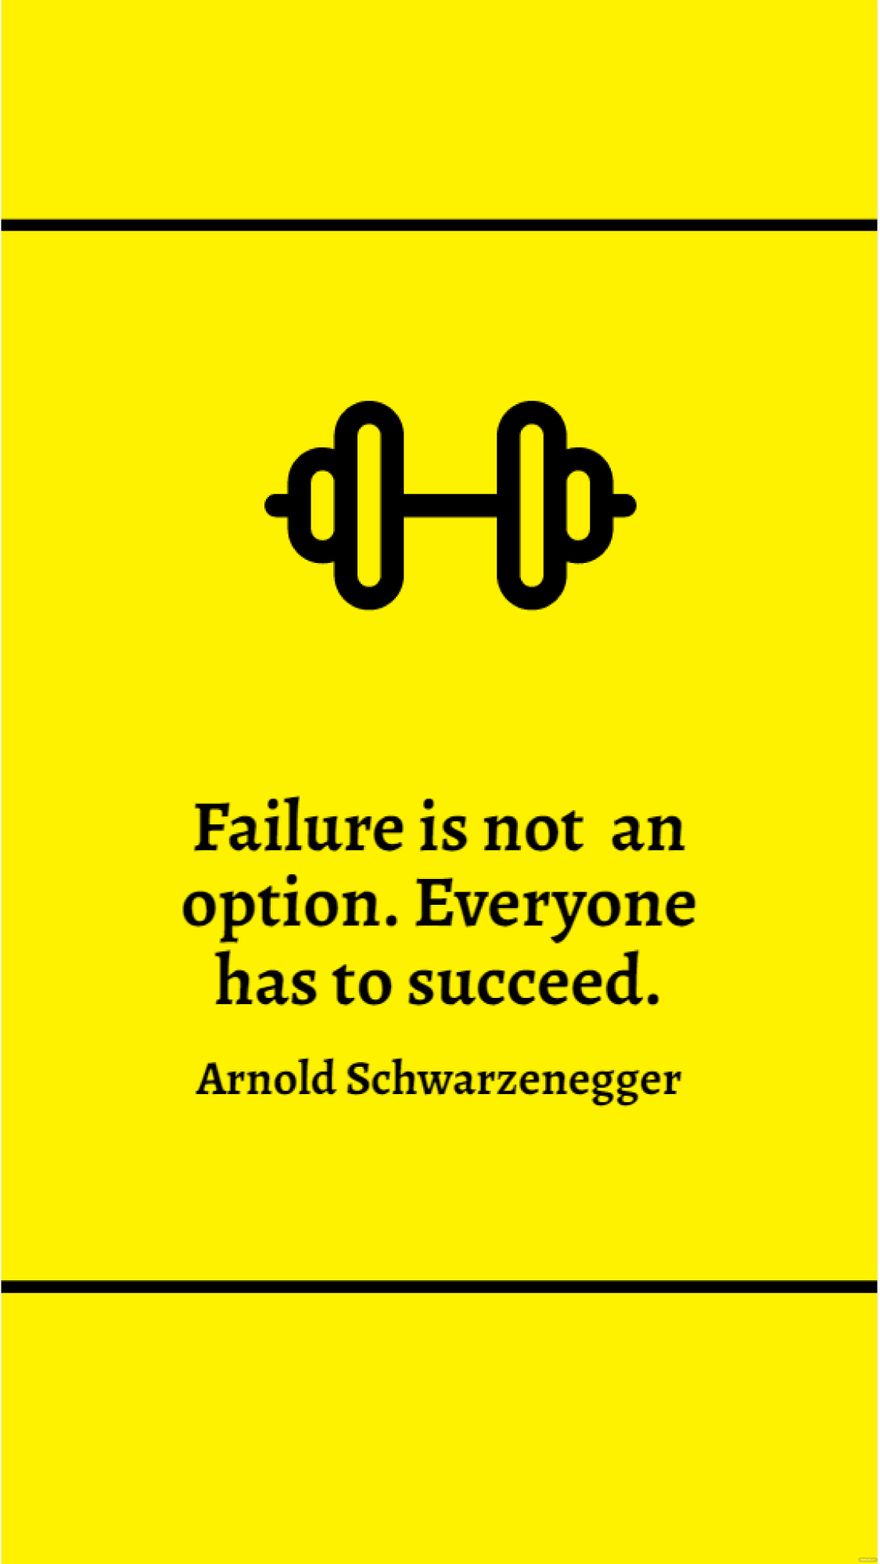 Free Arnold Schwarzenegger - Failure is not an option. Everyone has to succeed.